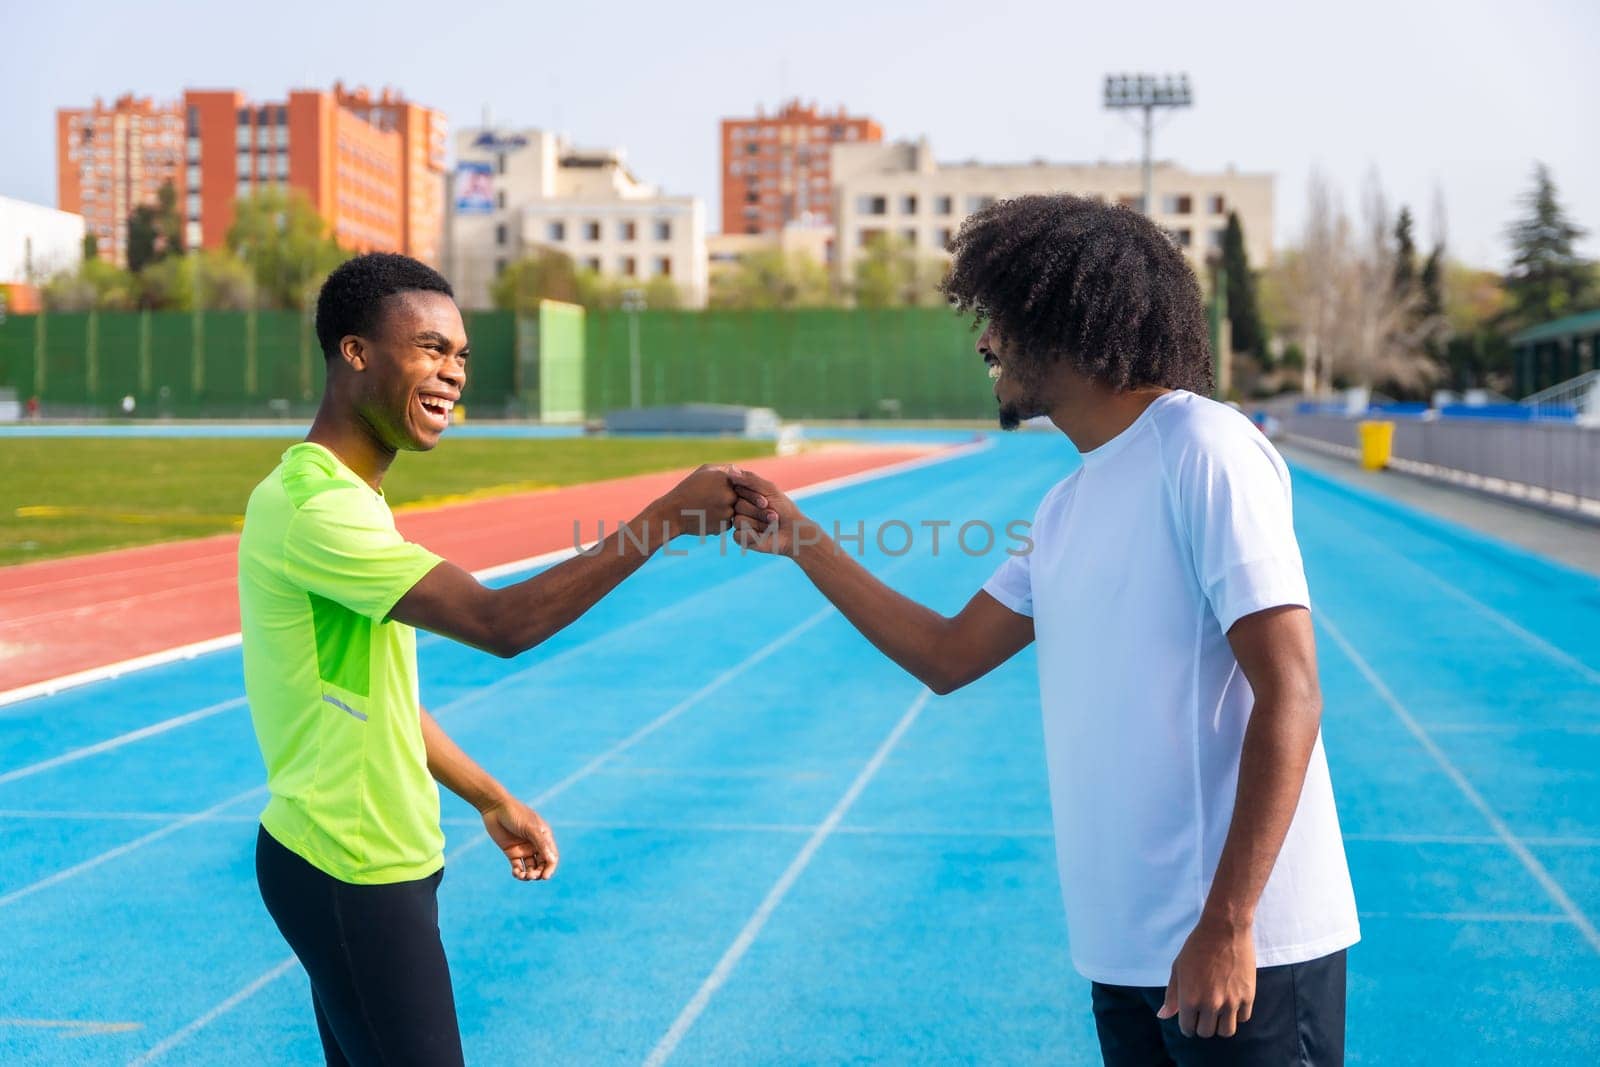 Runners fist bumping before training on an outdoor track by Huizi